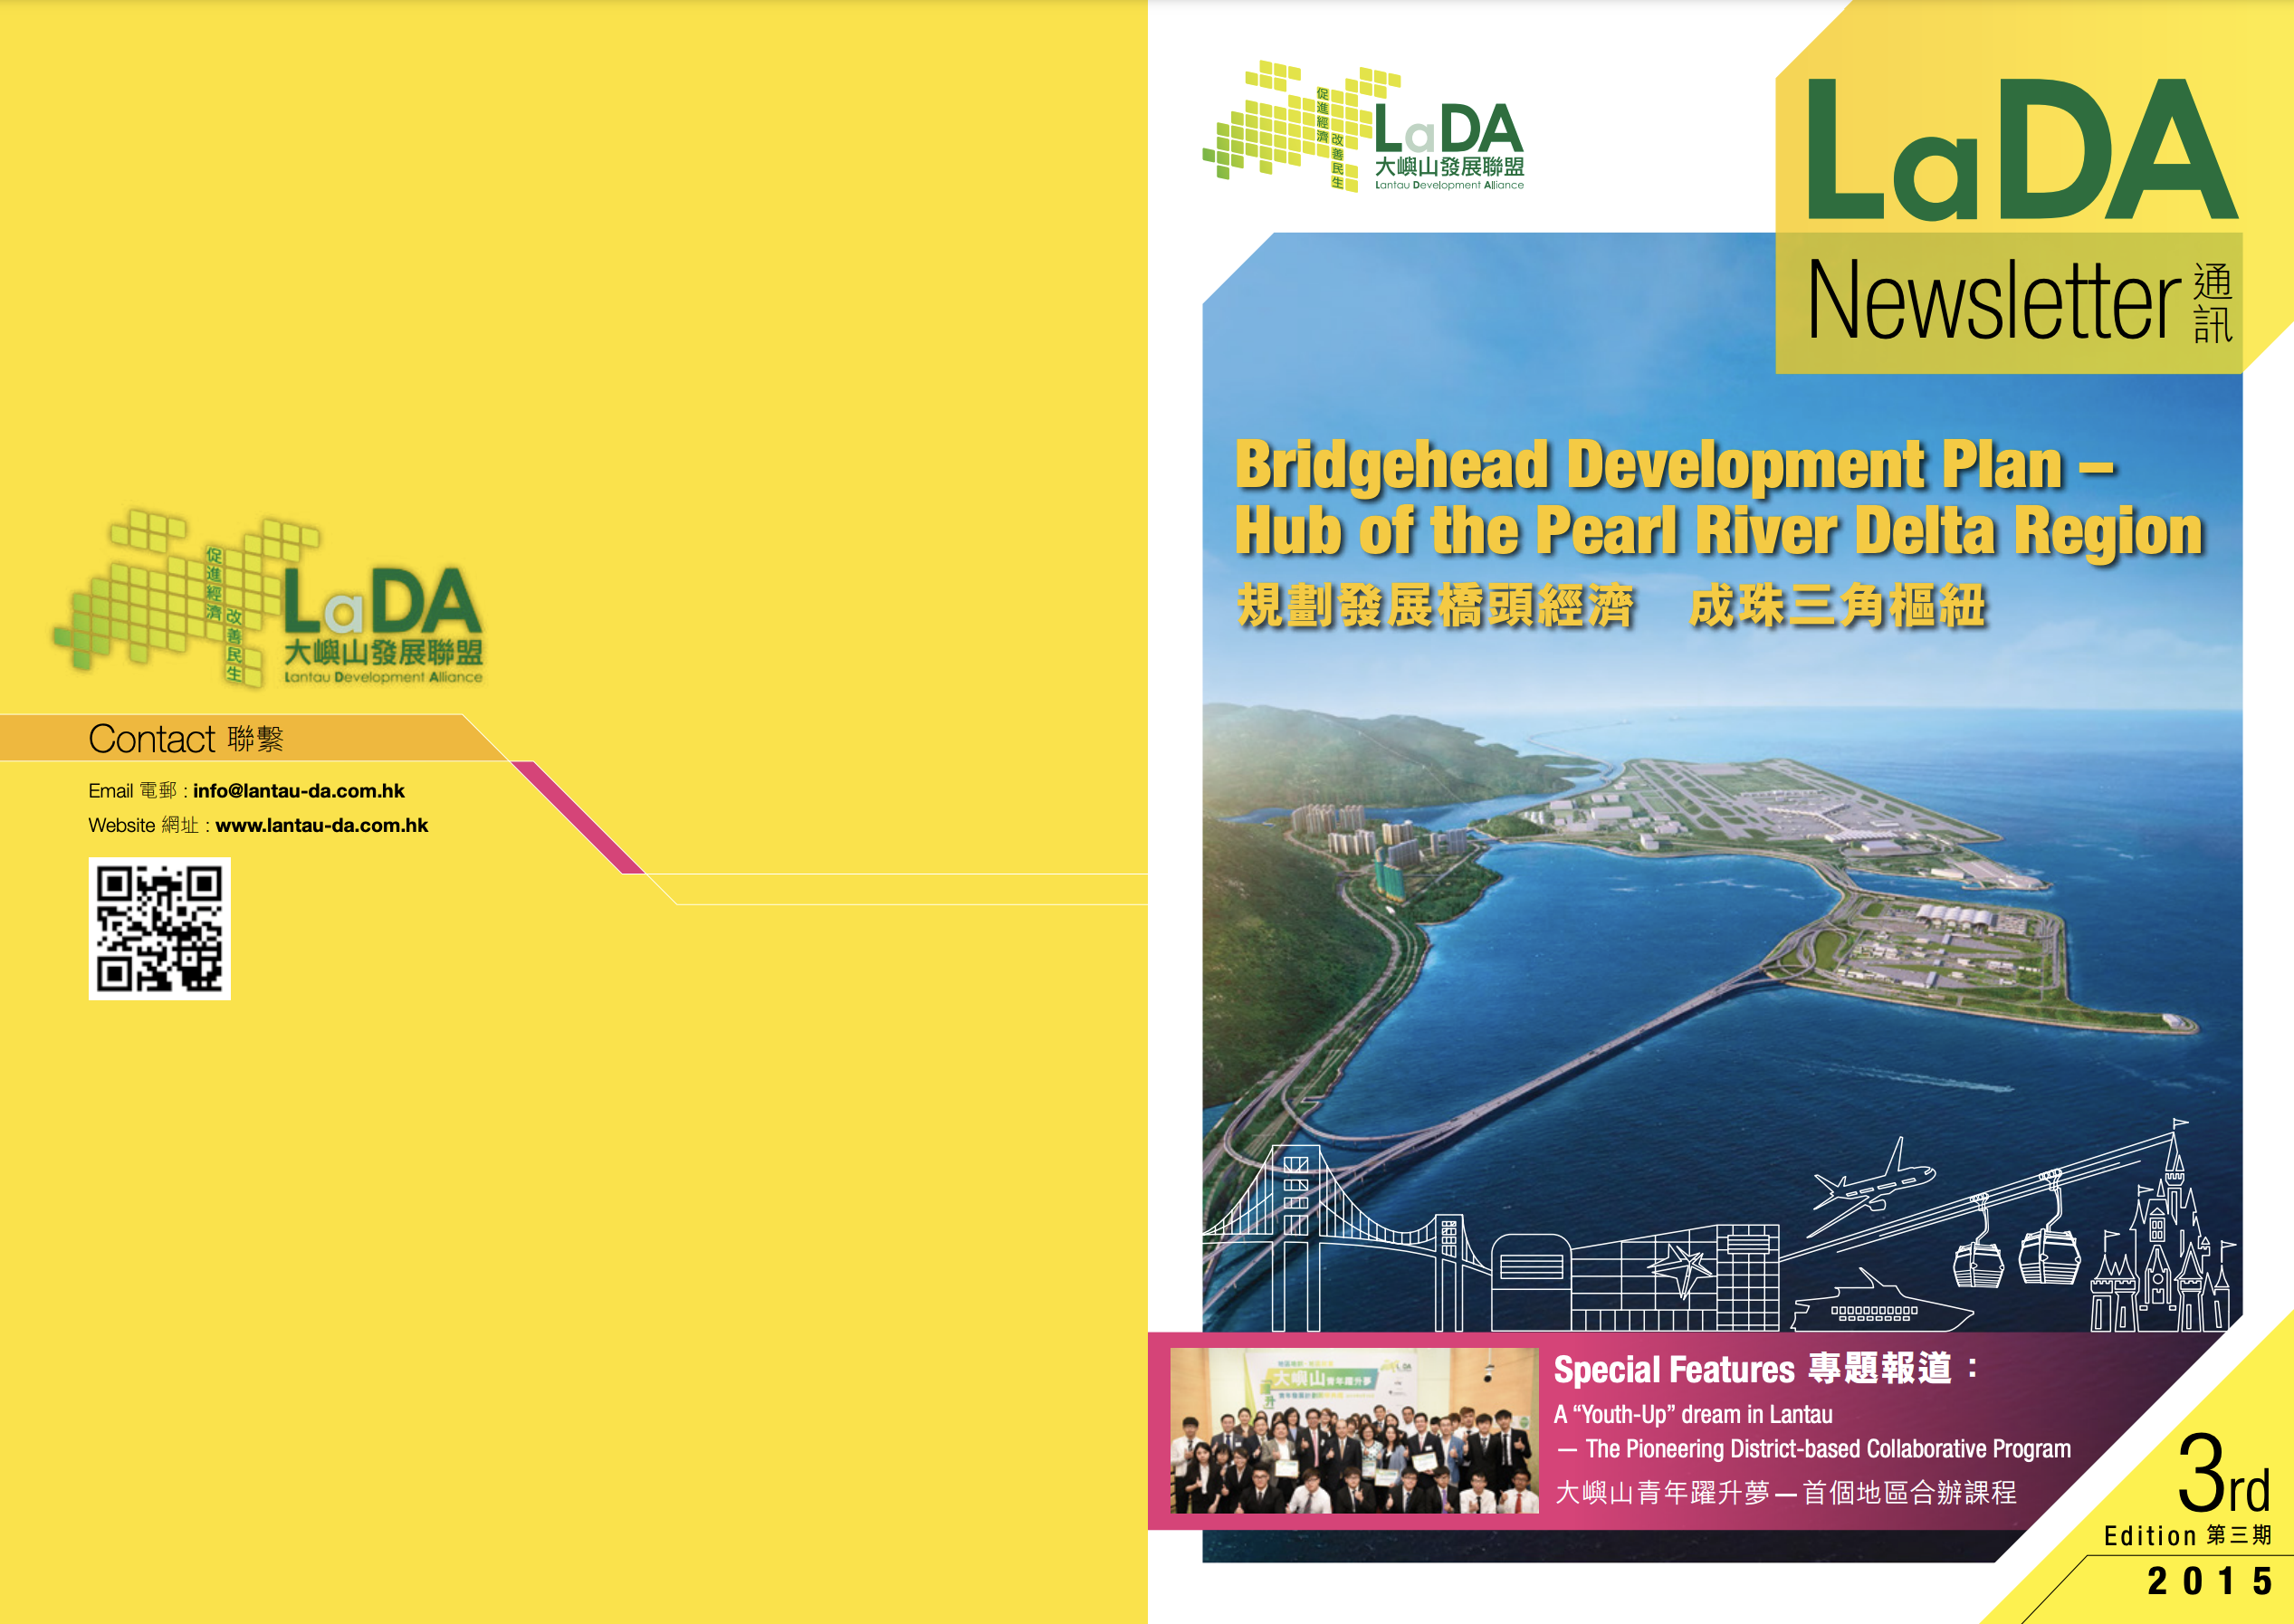 LaDA Newsletter 3rd Edition